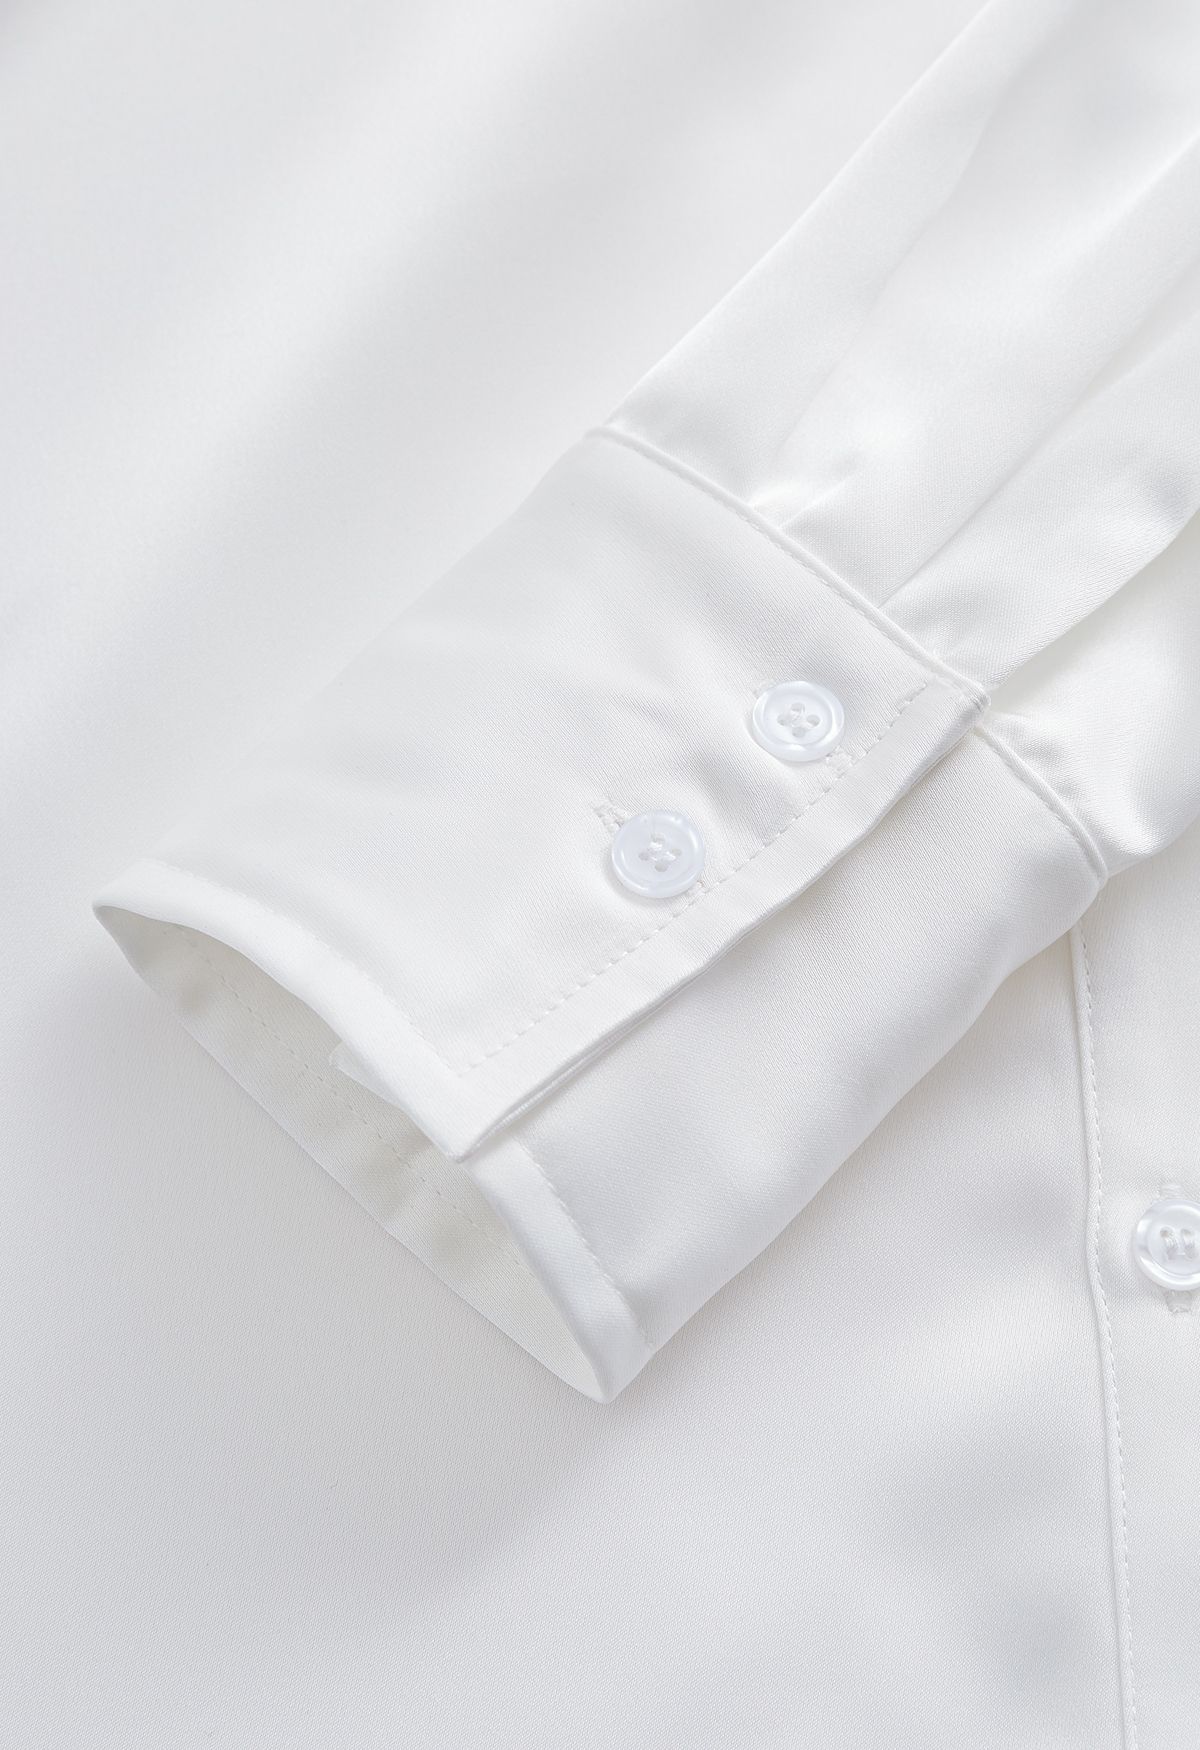 Satin Finish Button Up Shirt in White